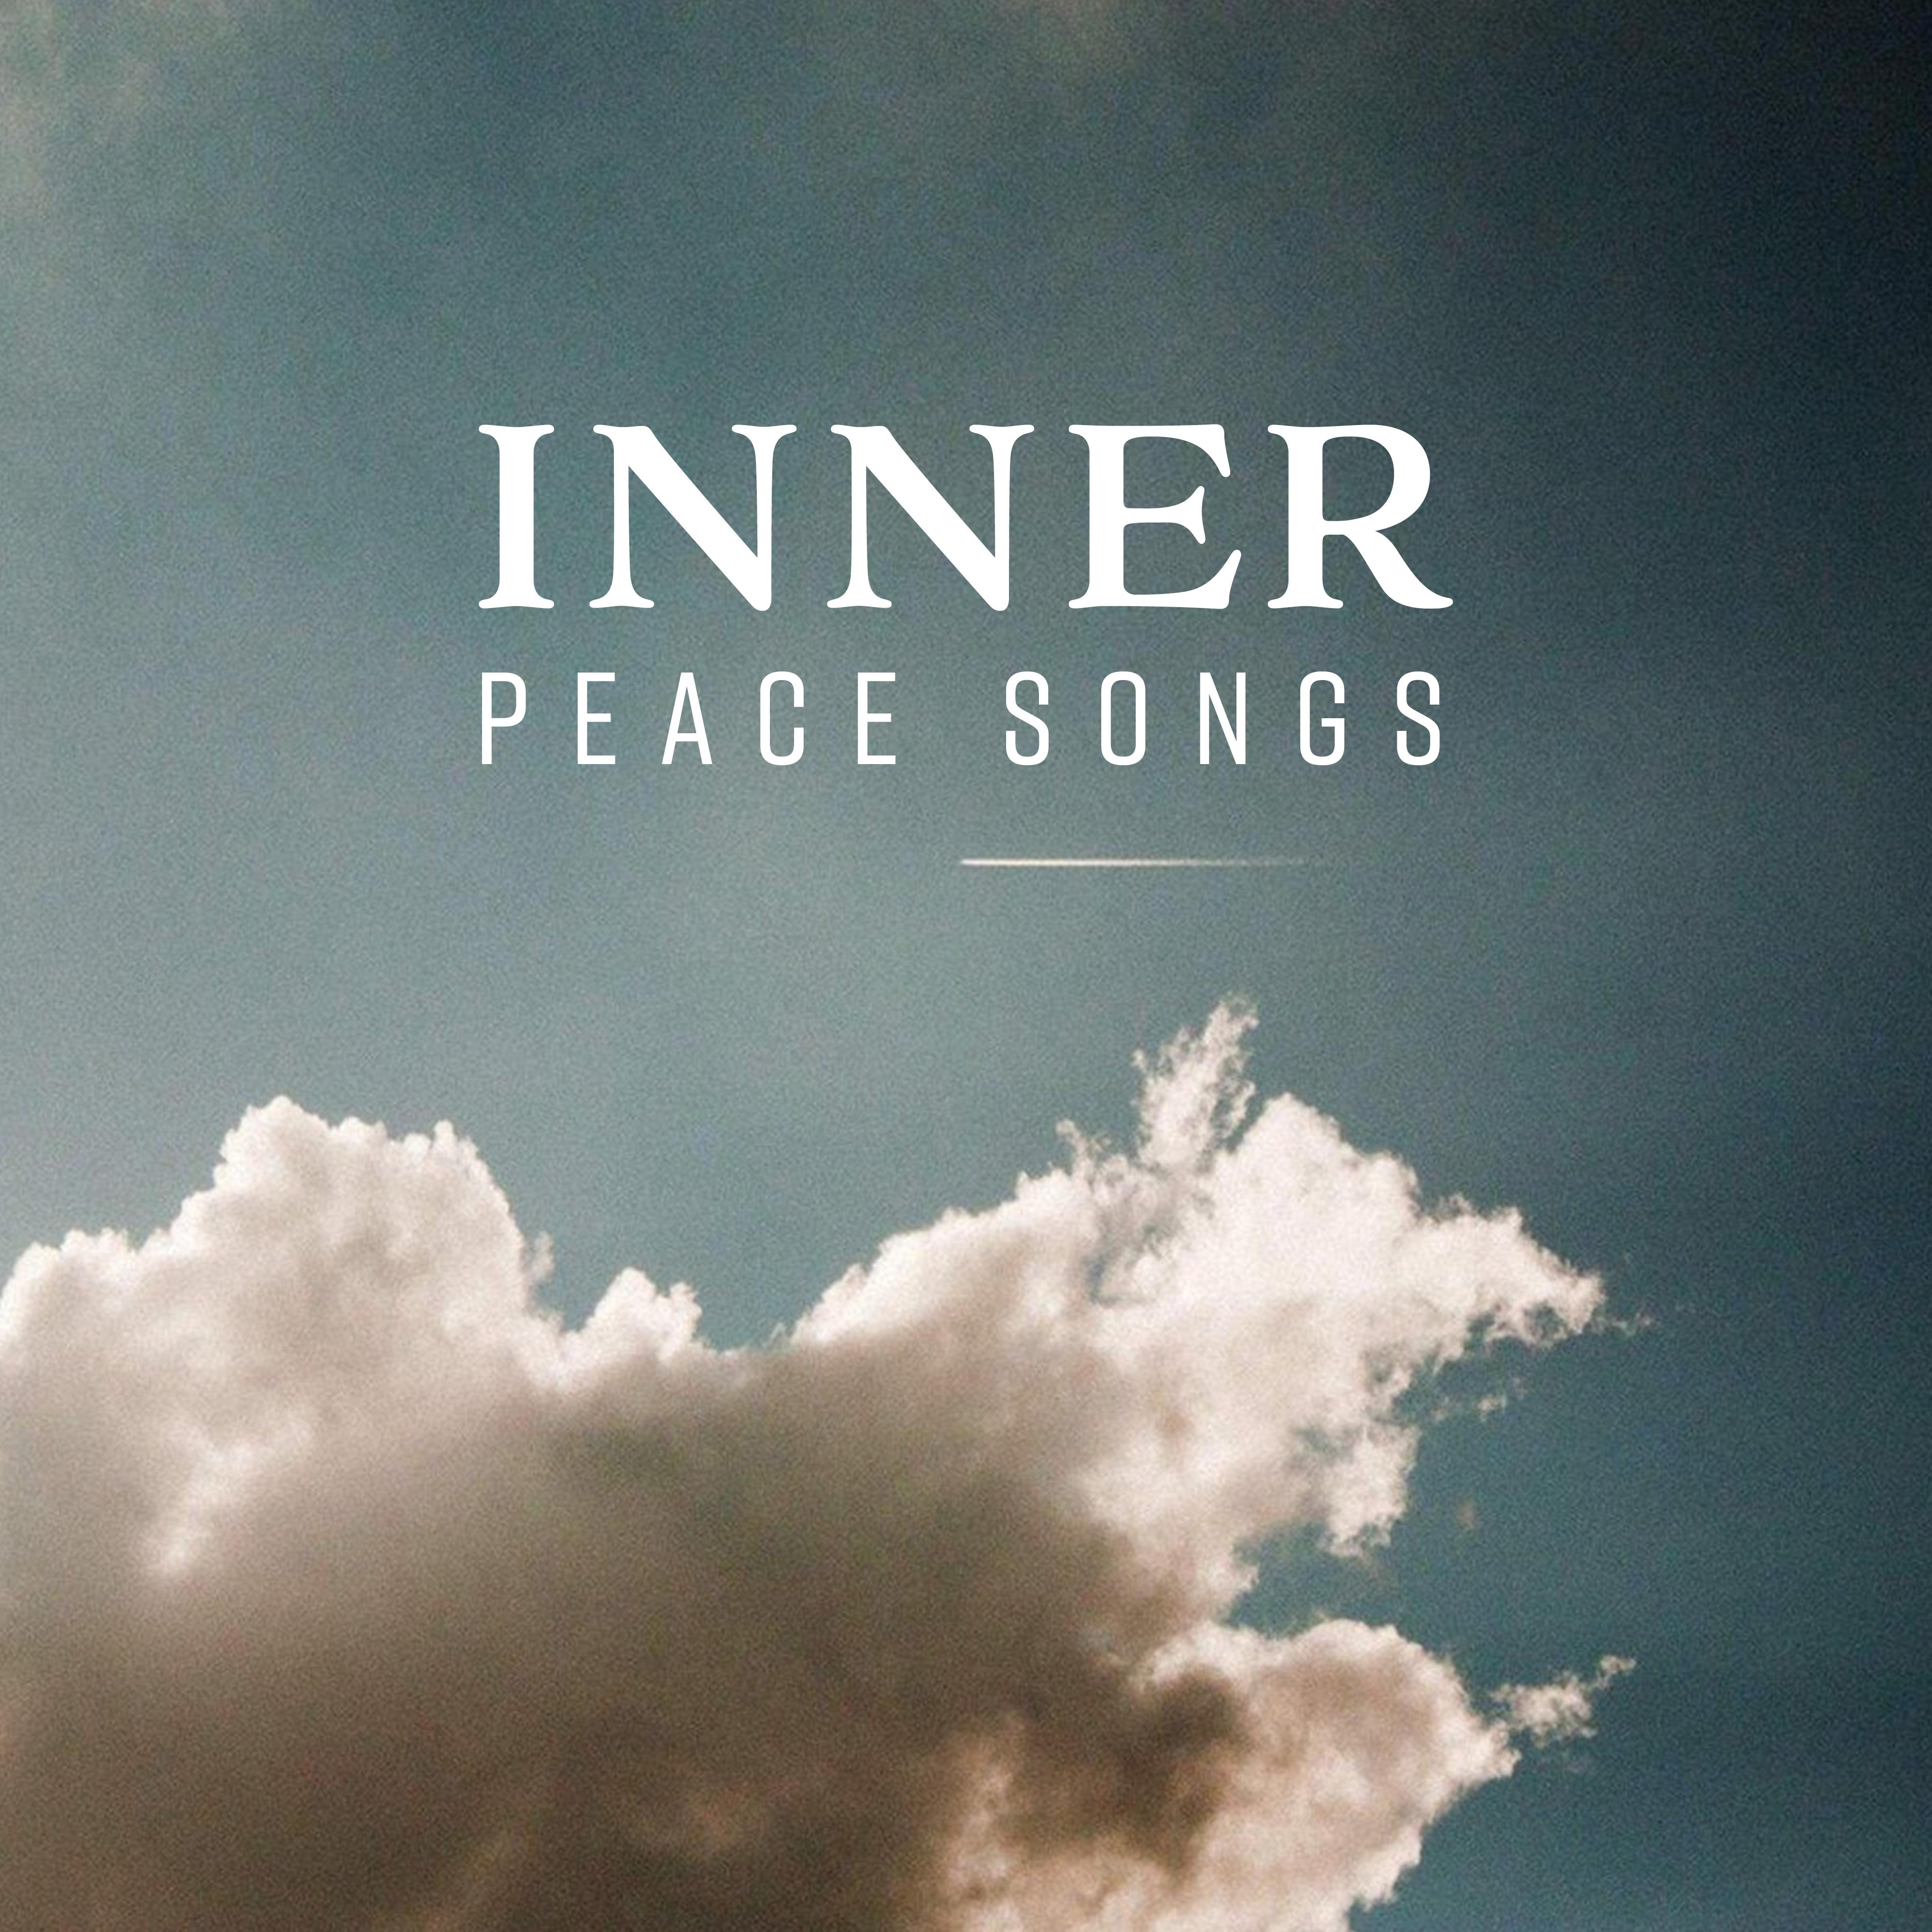 Inner Peace Songs: 15 New Age 2019 Melodies for Total Relax, Music Remedy for Stress & Anxiety